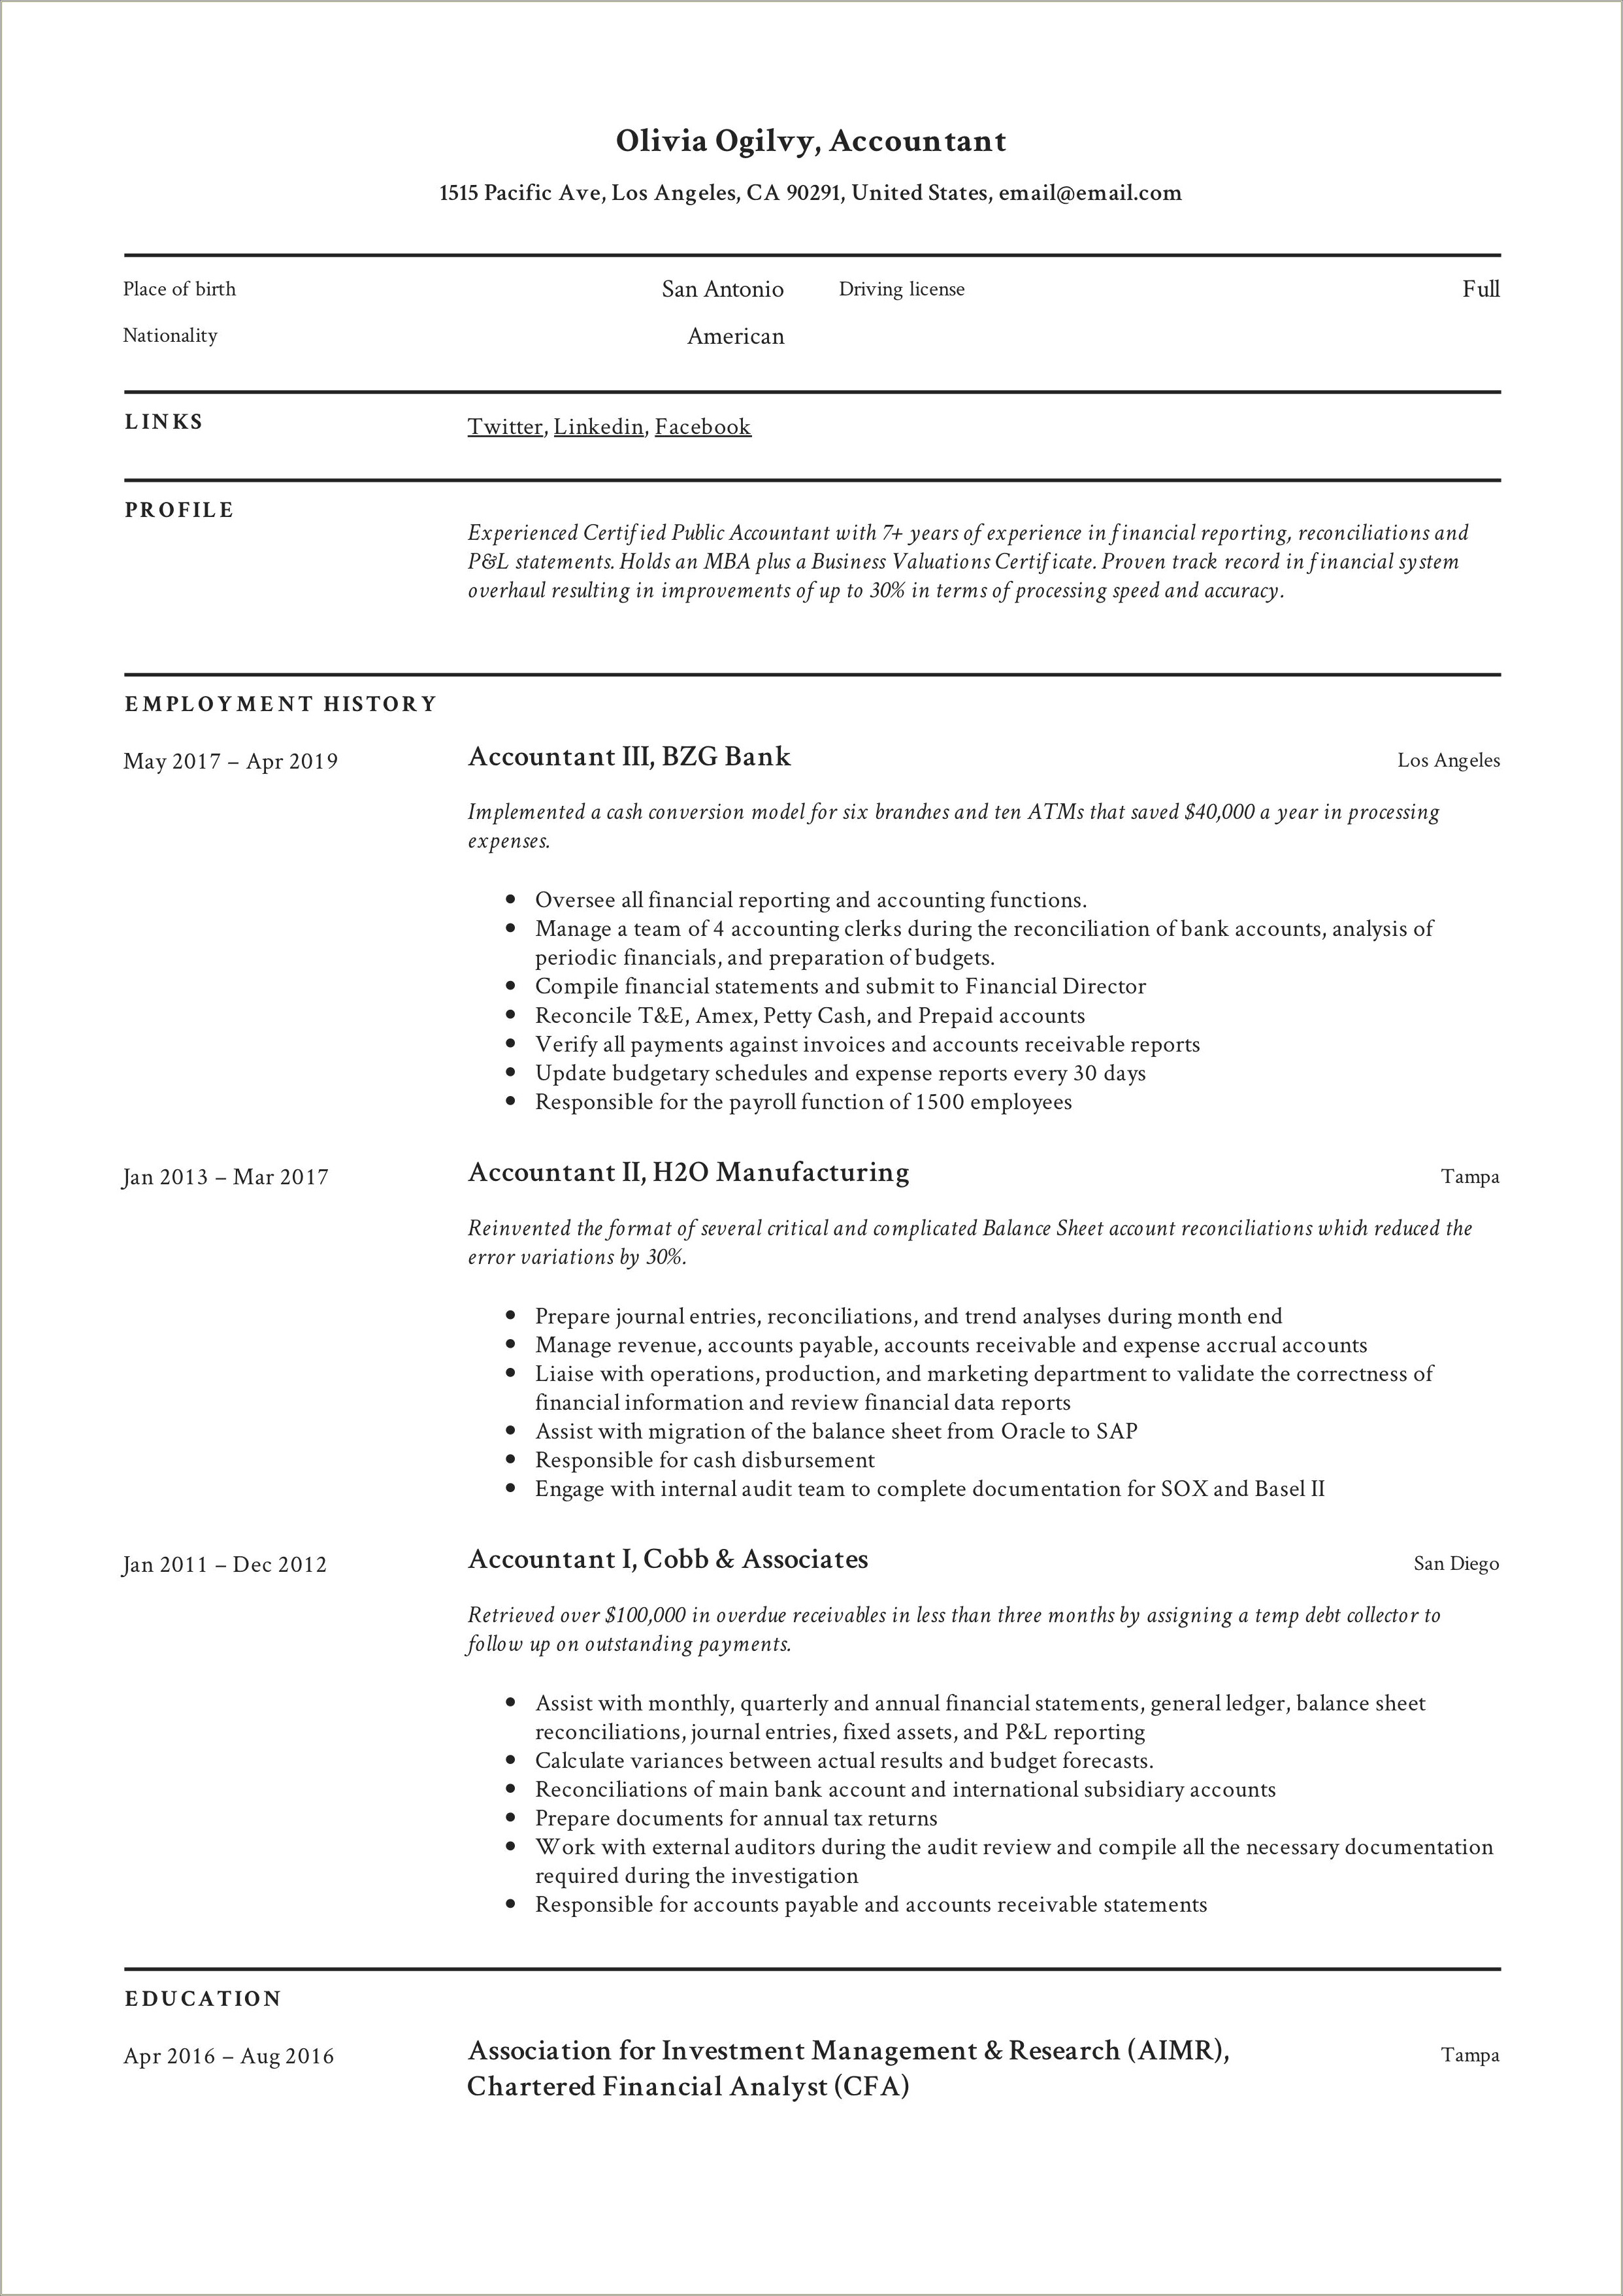 Work Experience In Resume For Accountant